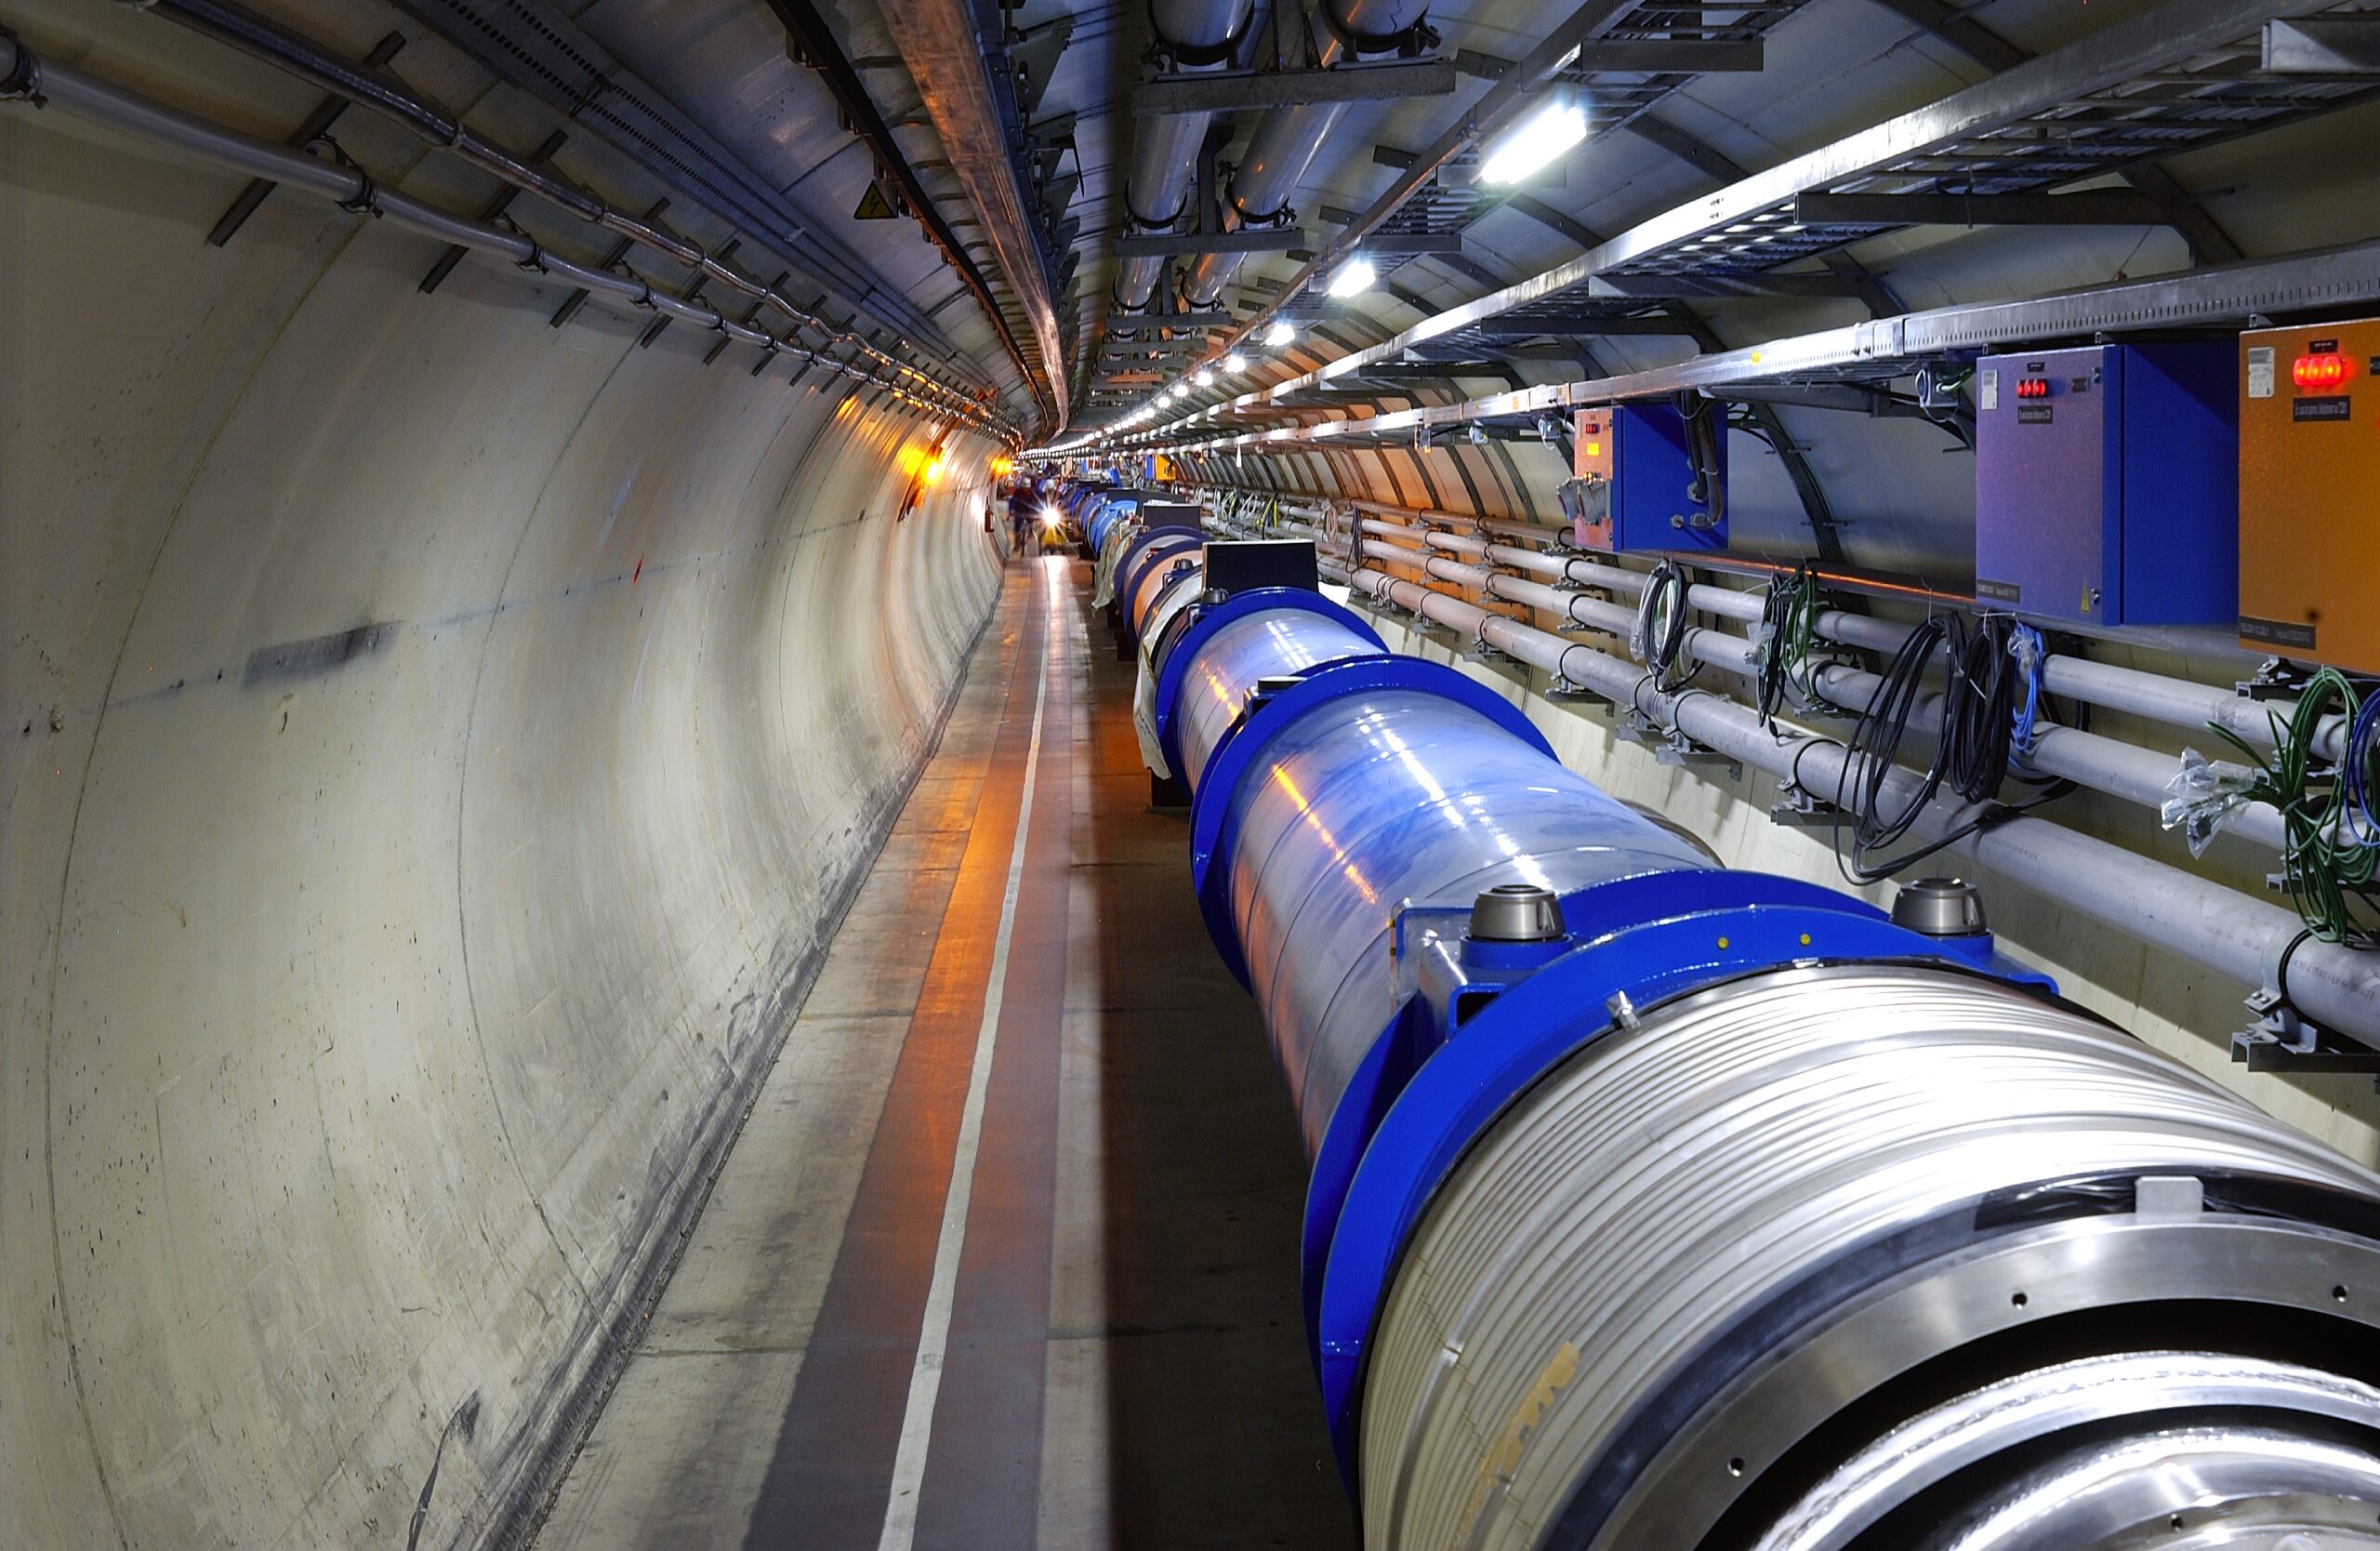 The X particle was detected at CERN's underground LHC facility.